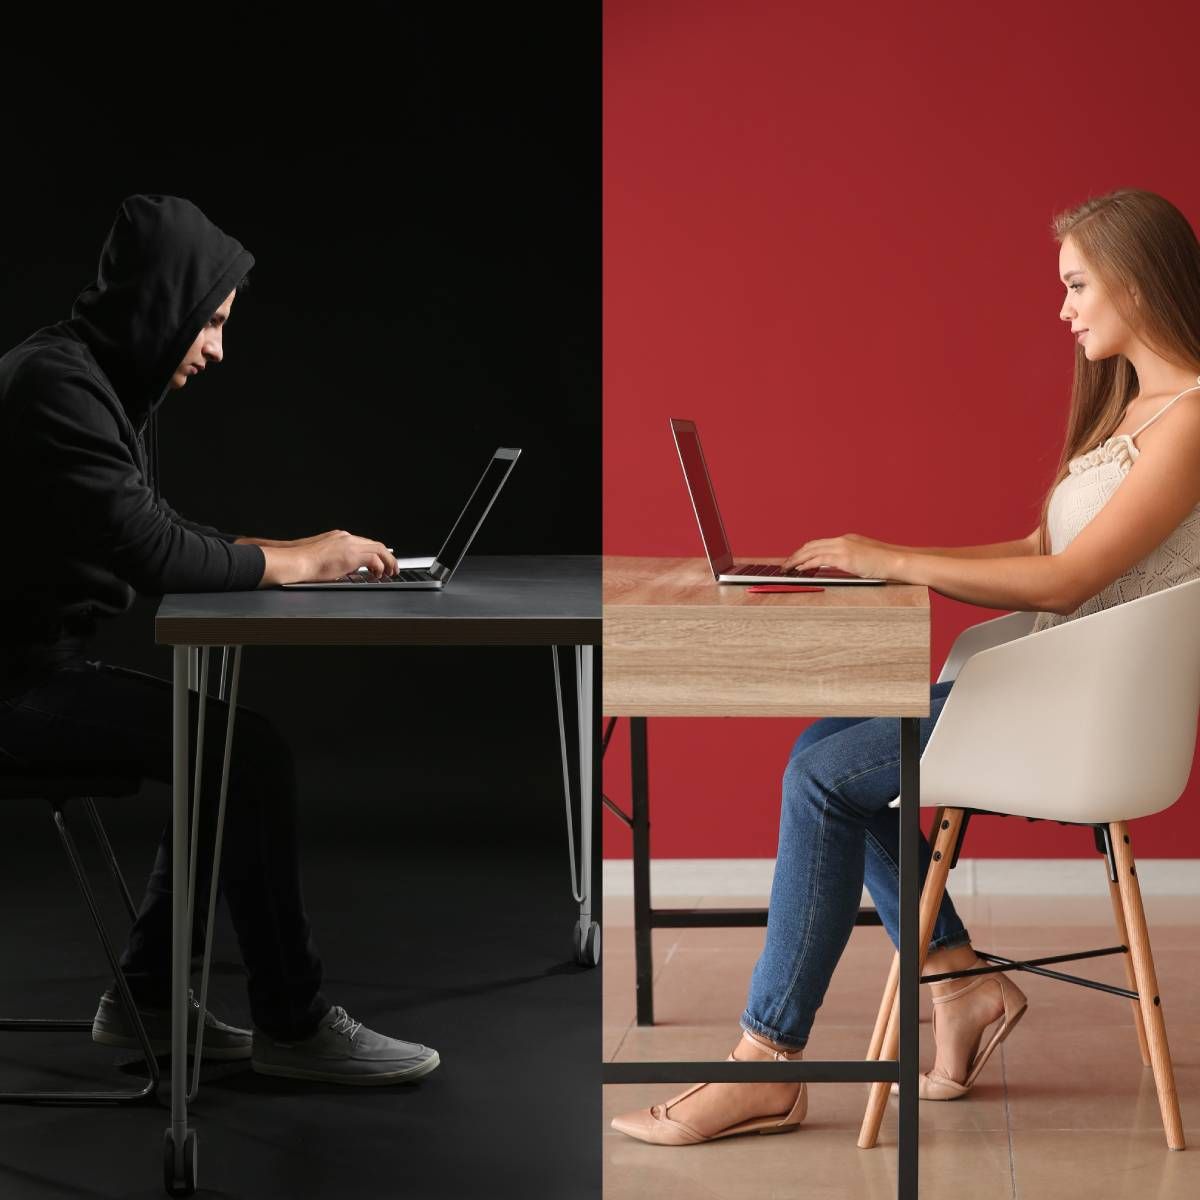 A woman is chatting online with a potential suitor who is actually a hacker.